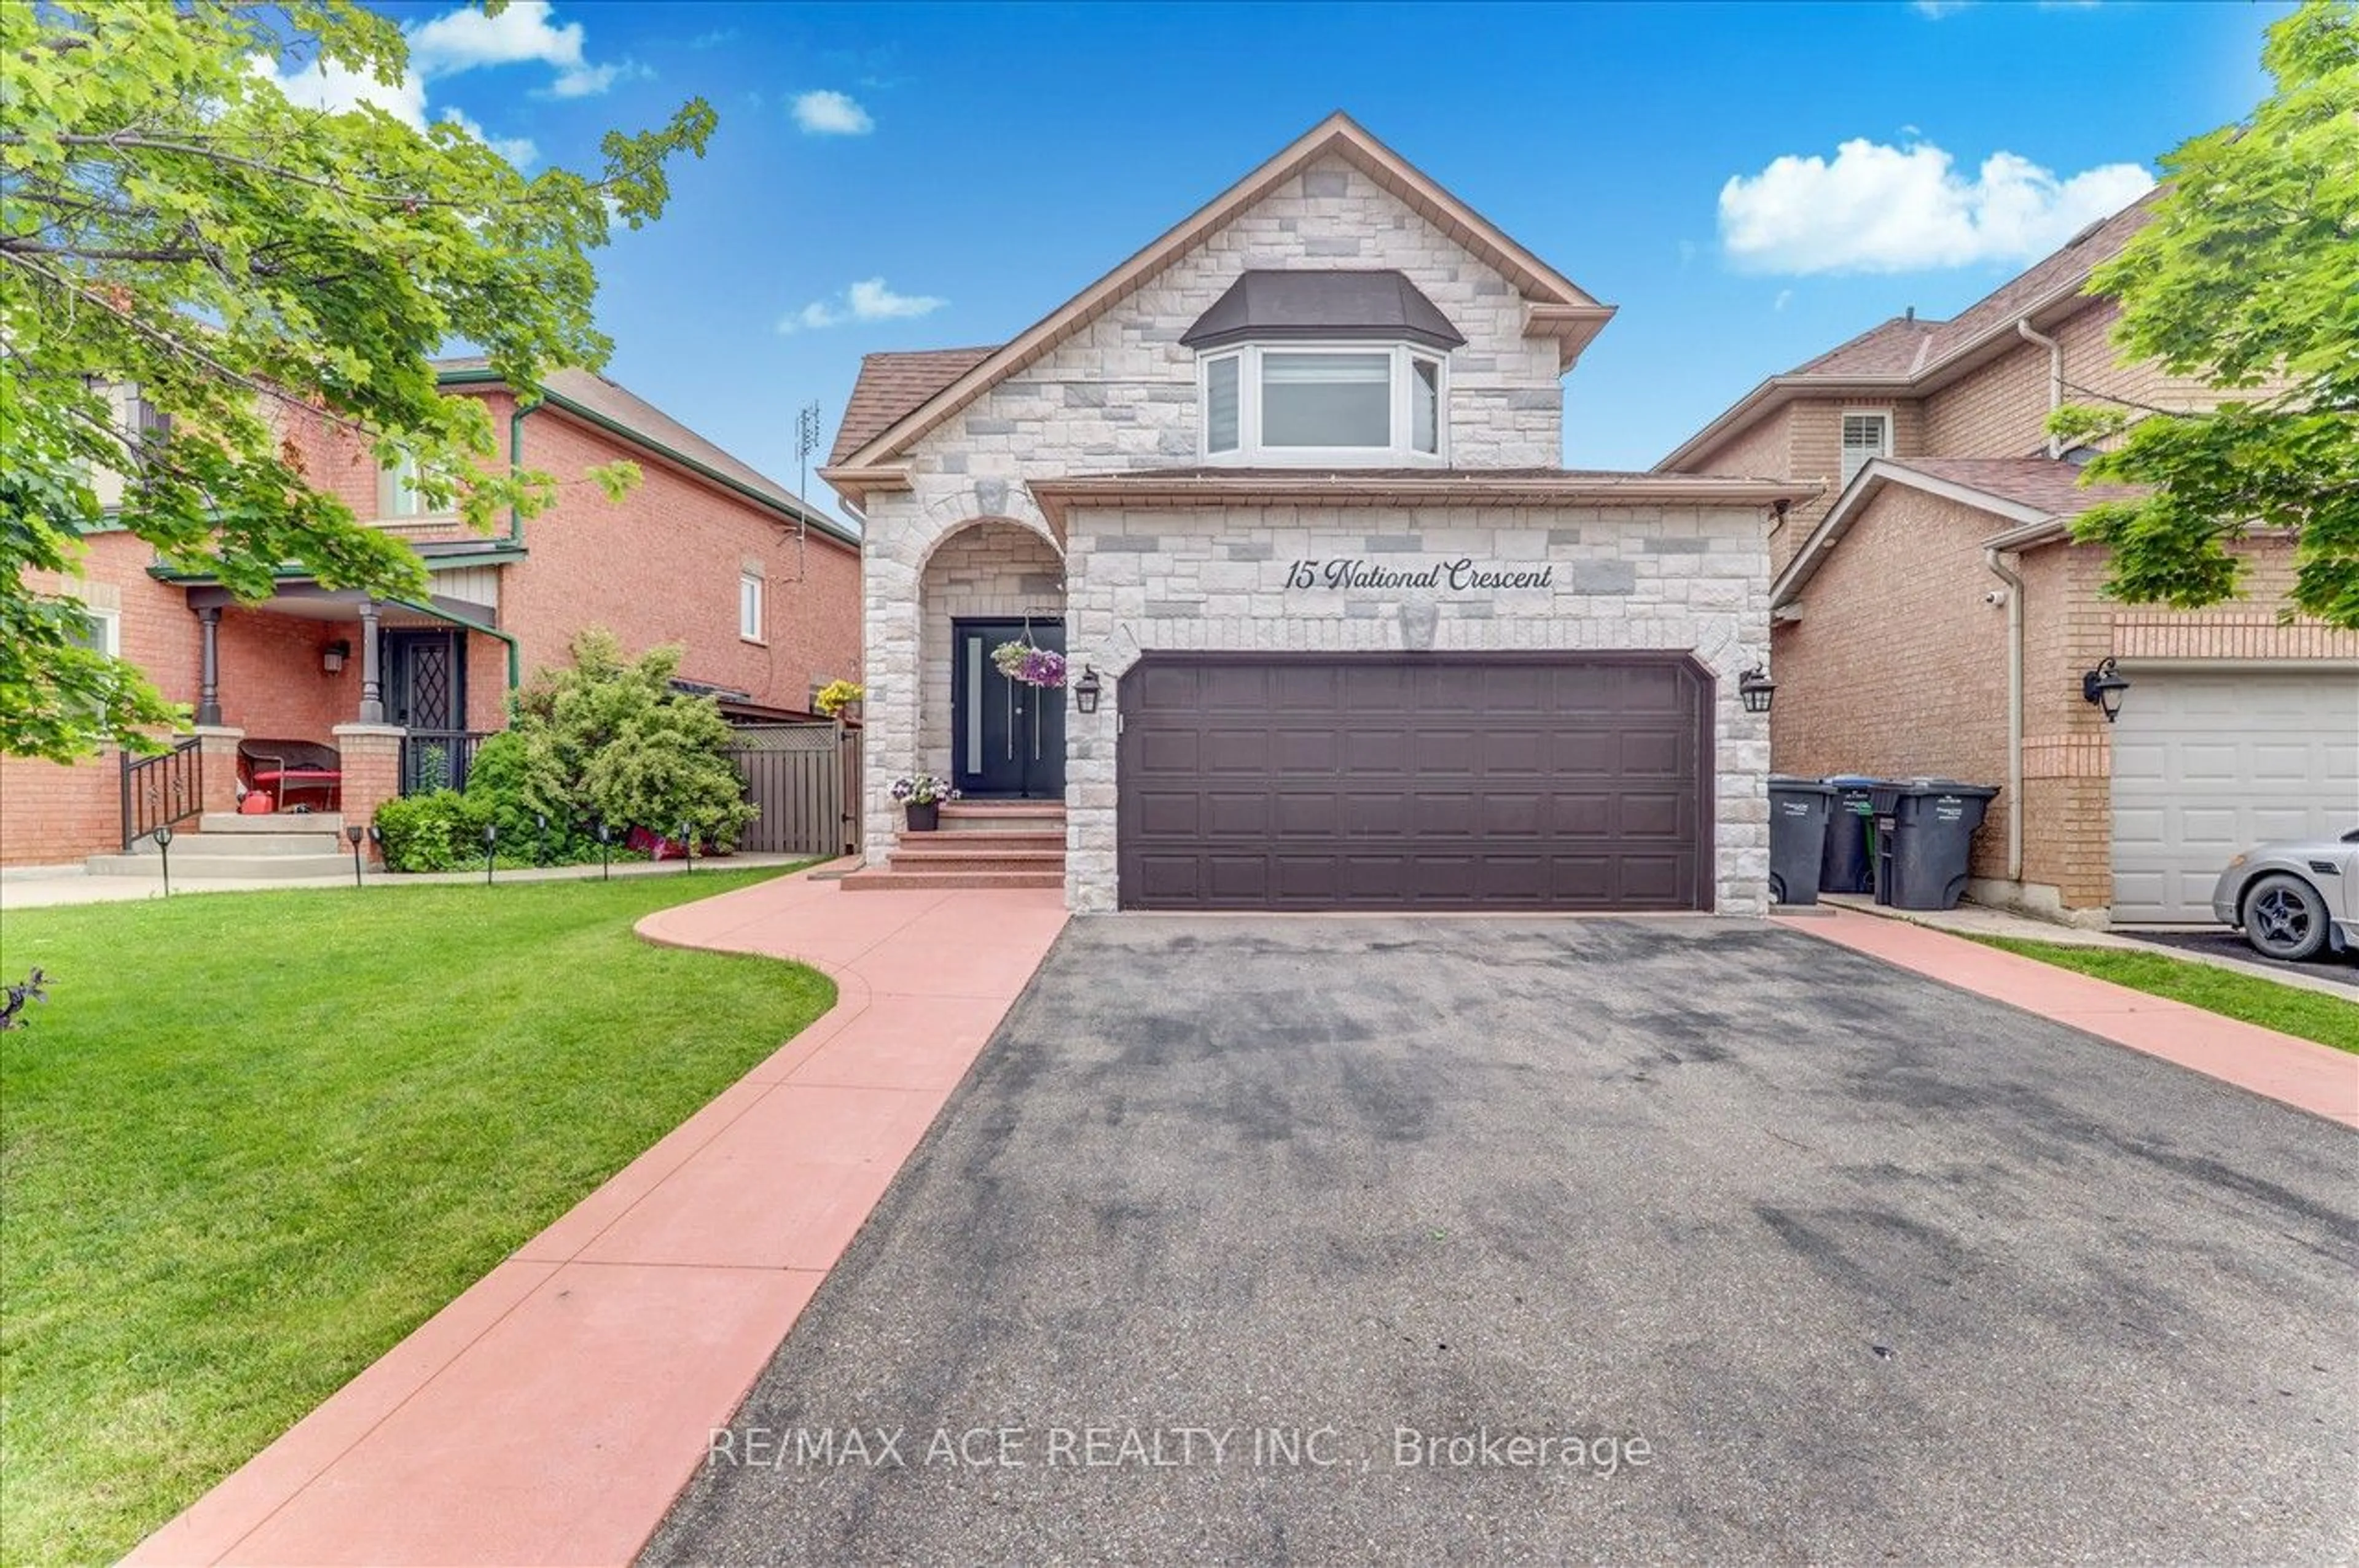 Frontside or backside of a home for 15 National Cres, Brampton Ontario L7A 1J2